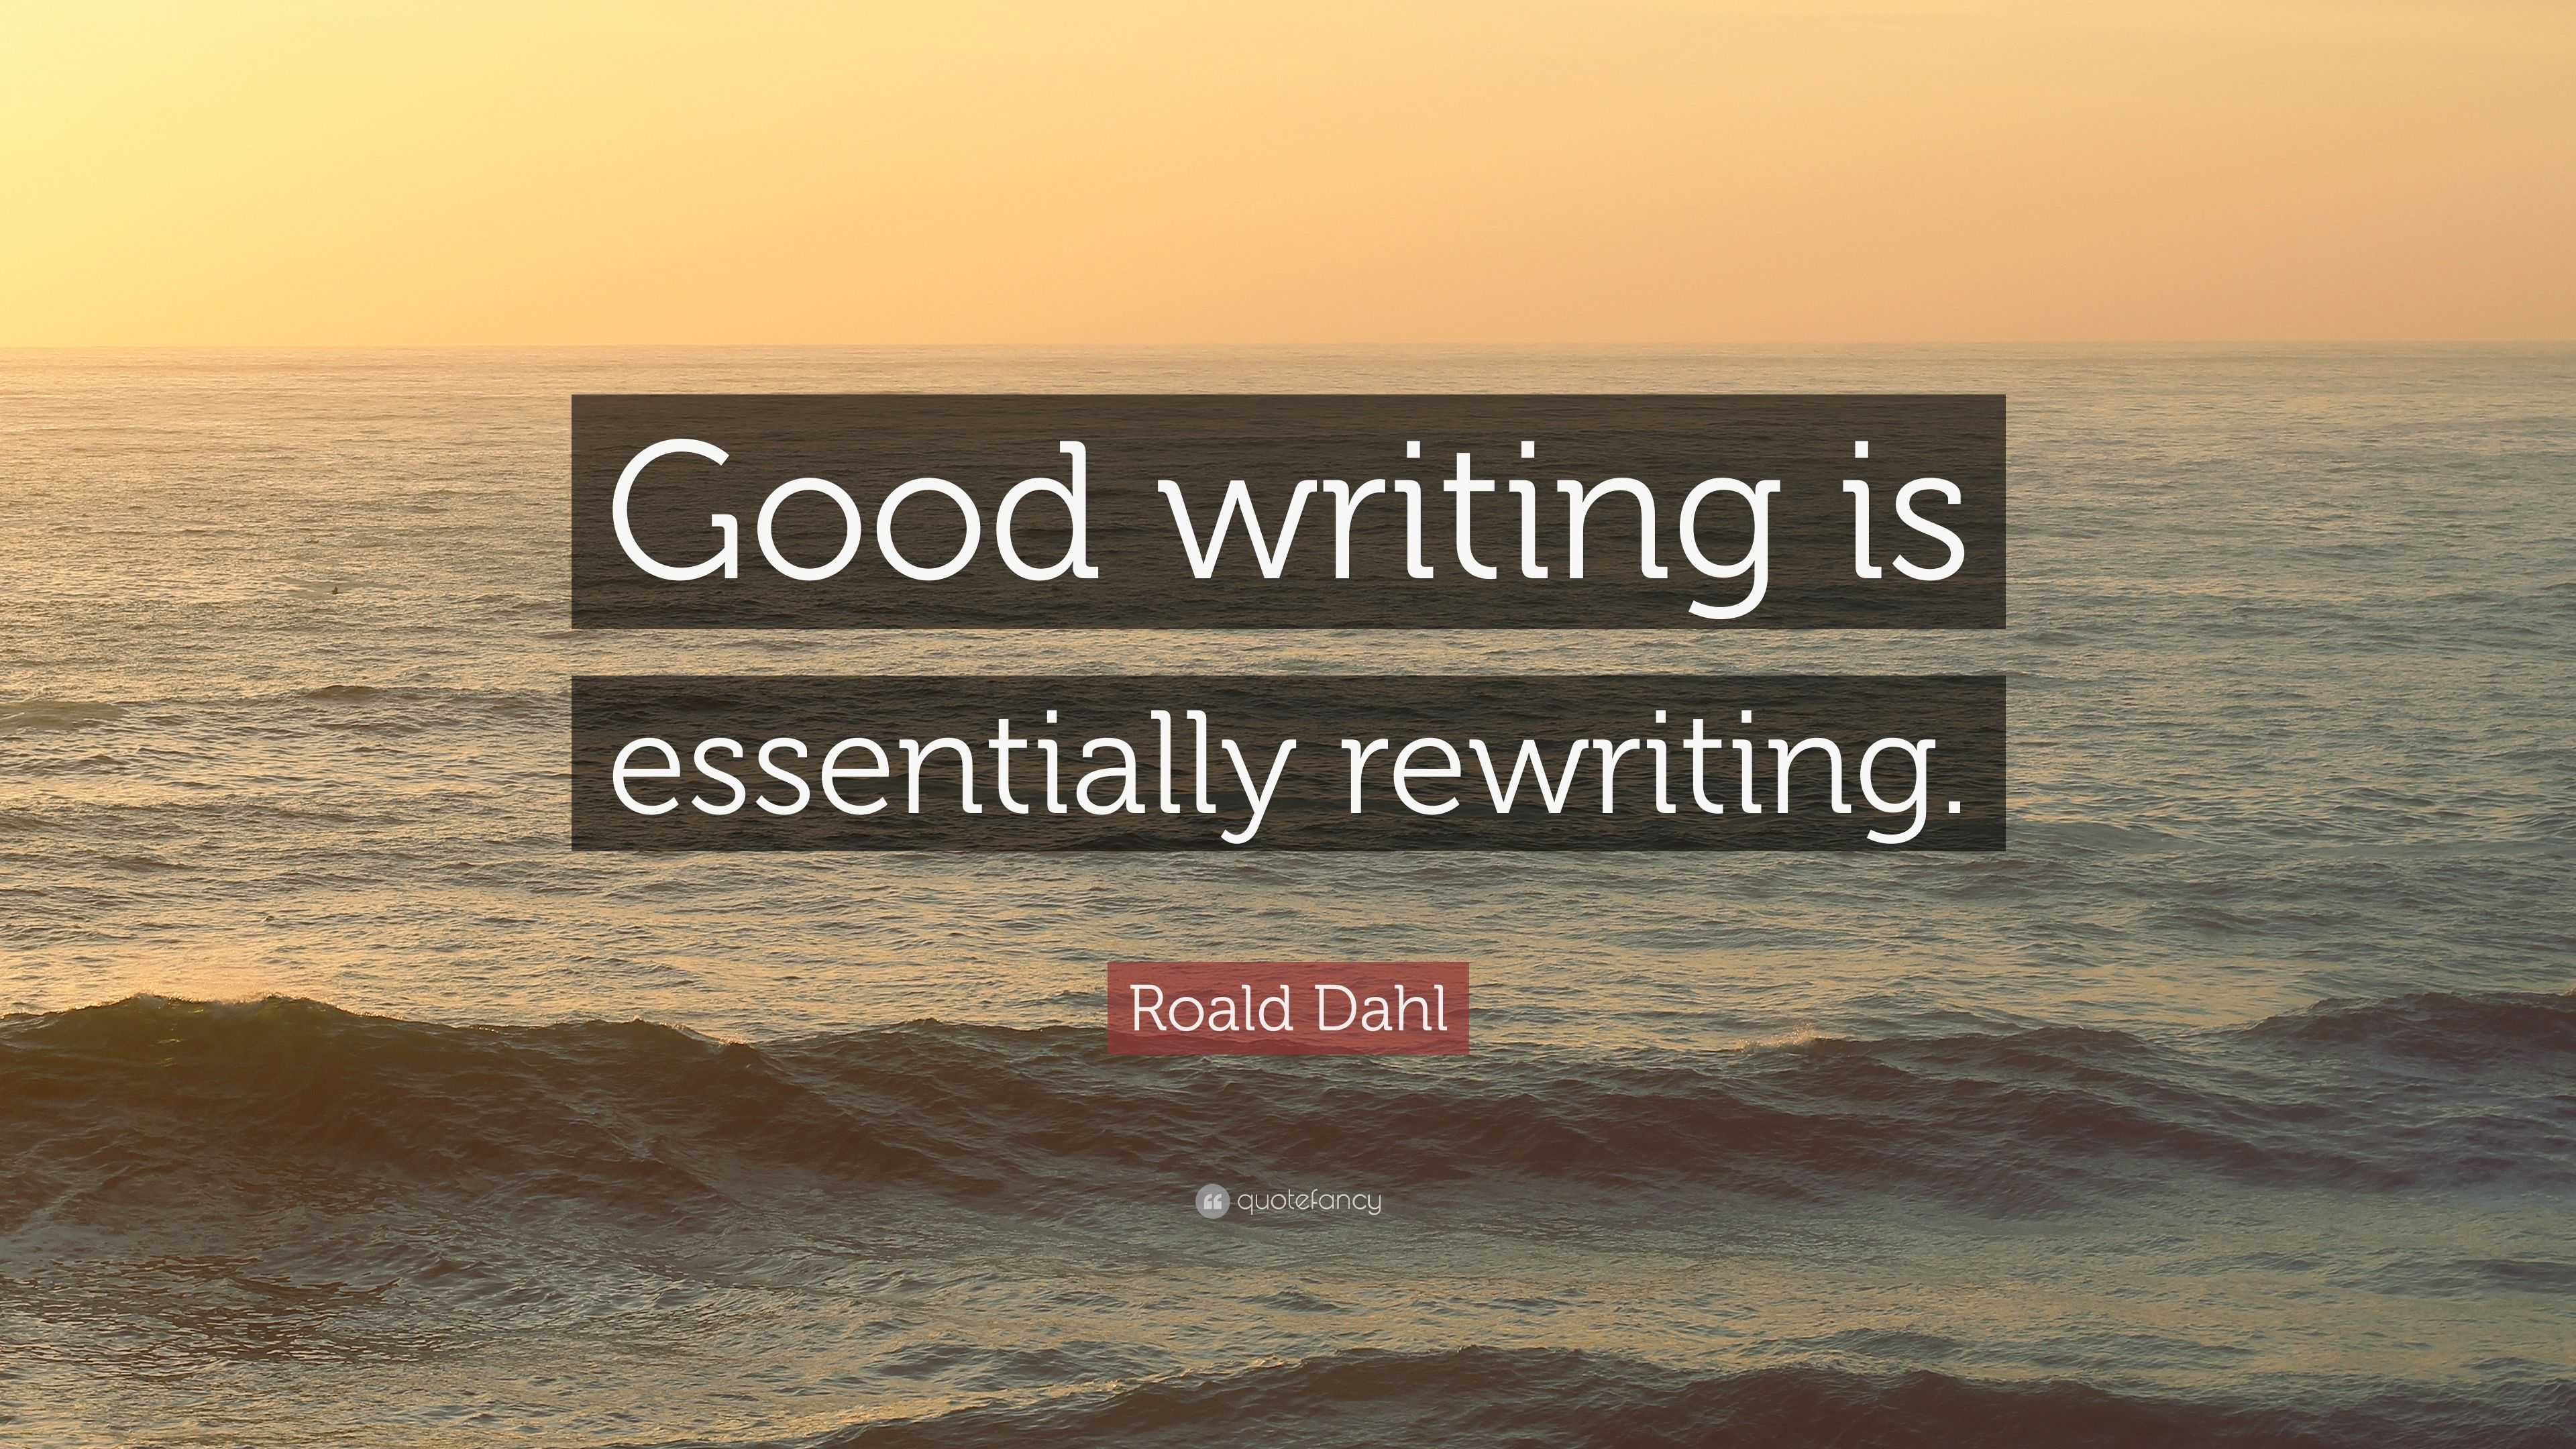 4702716 Roald Dahl Quote Good writing is essentially rewriting - Best Essay Writing Service - Advanced Essay Writer from the Reliable Paper Writing Services